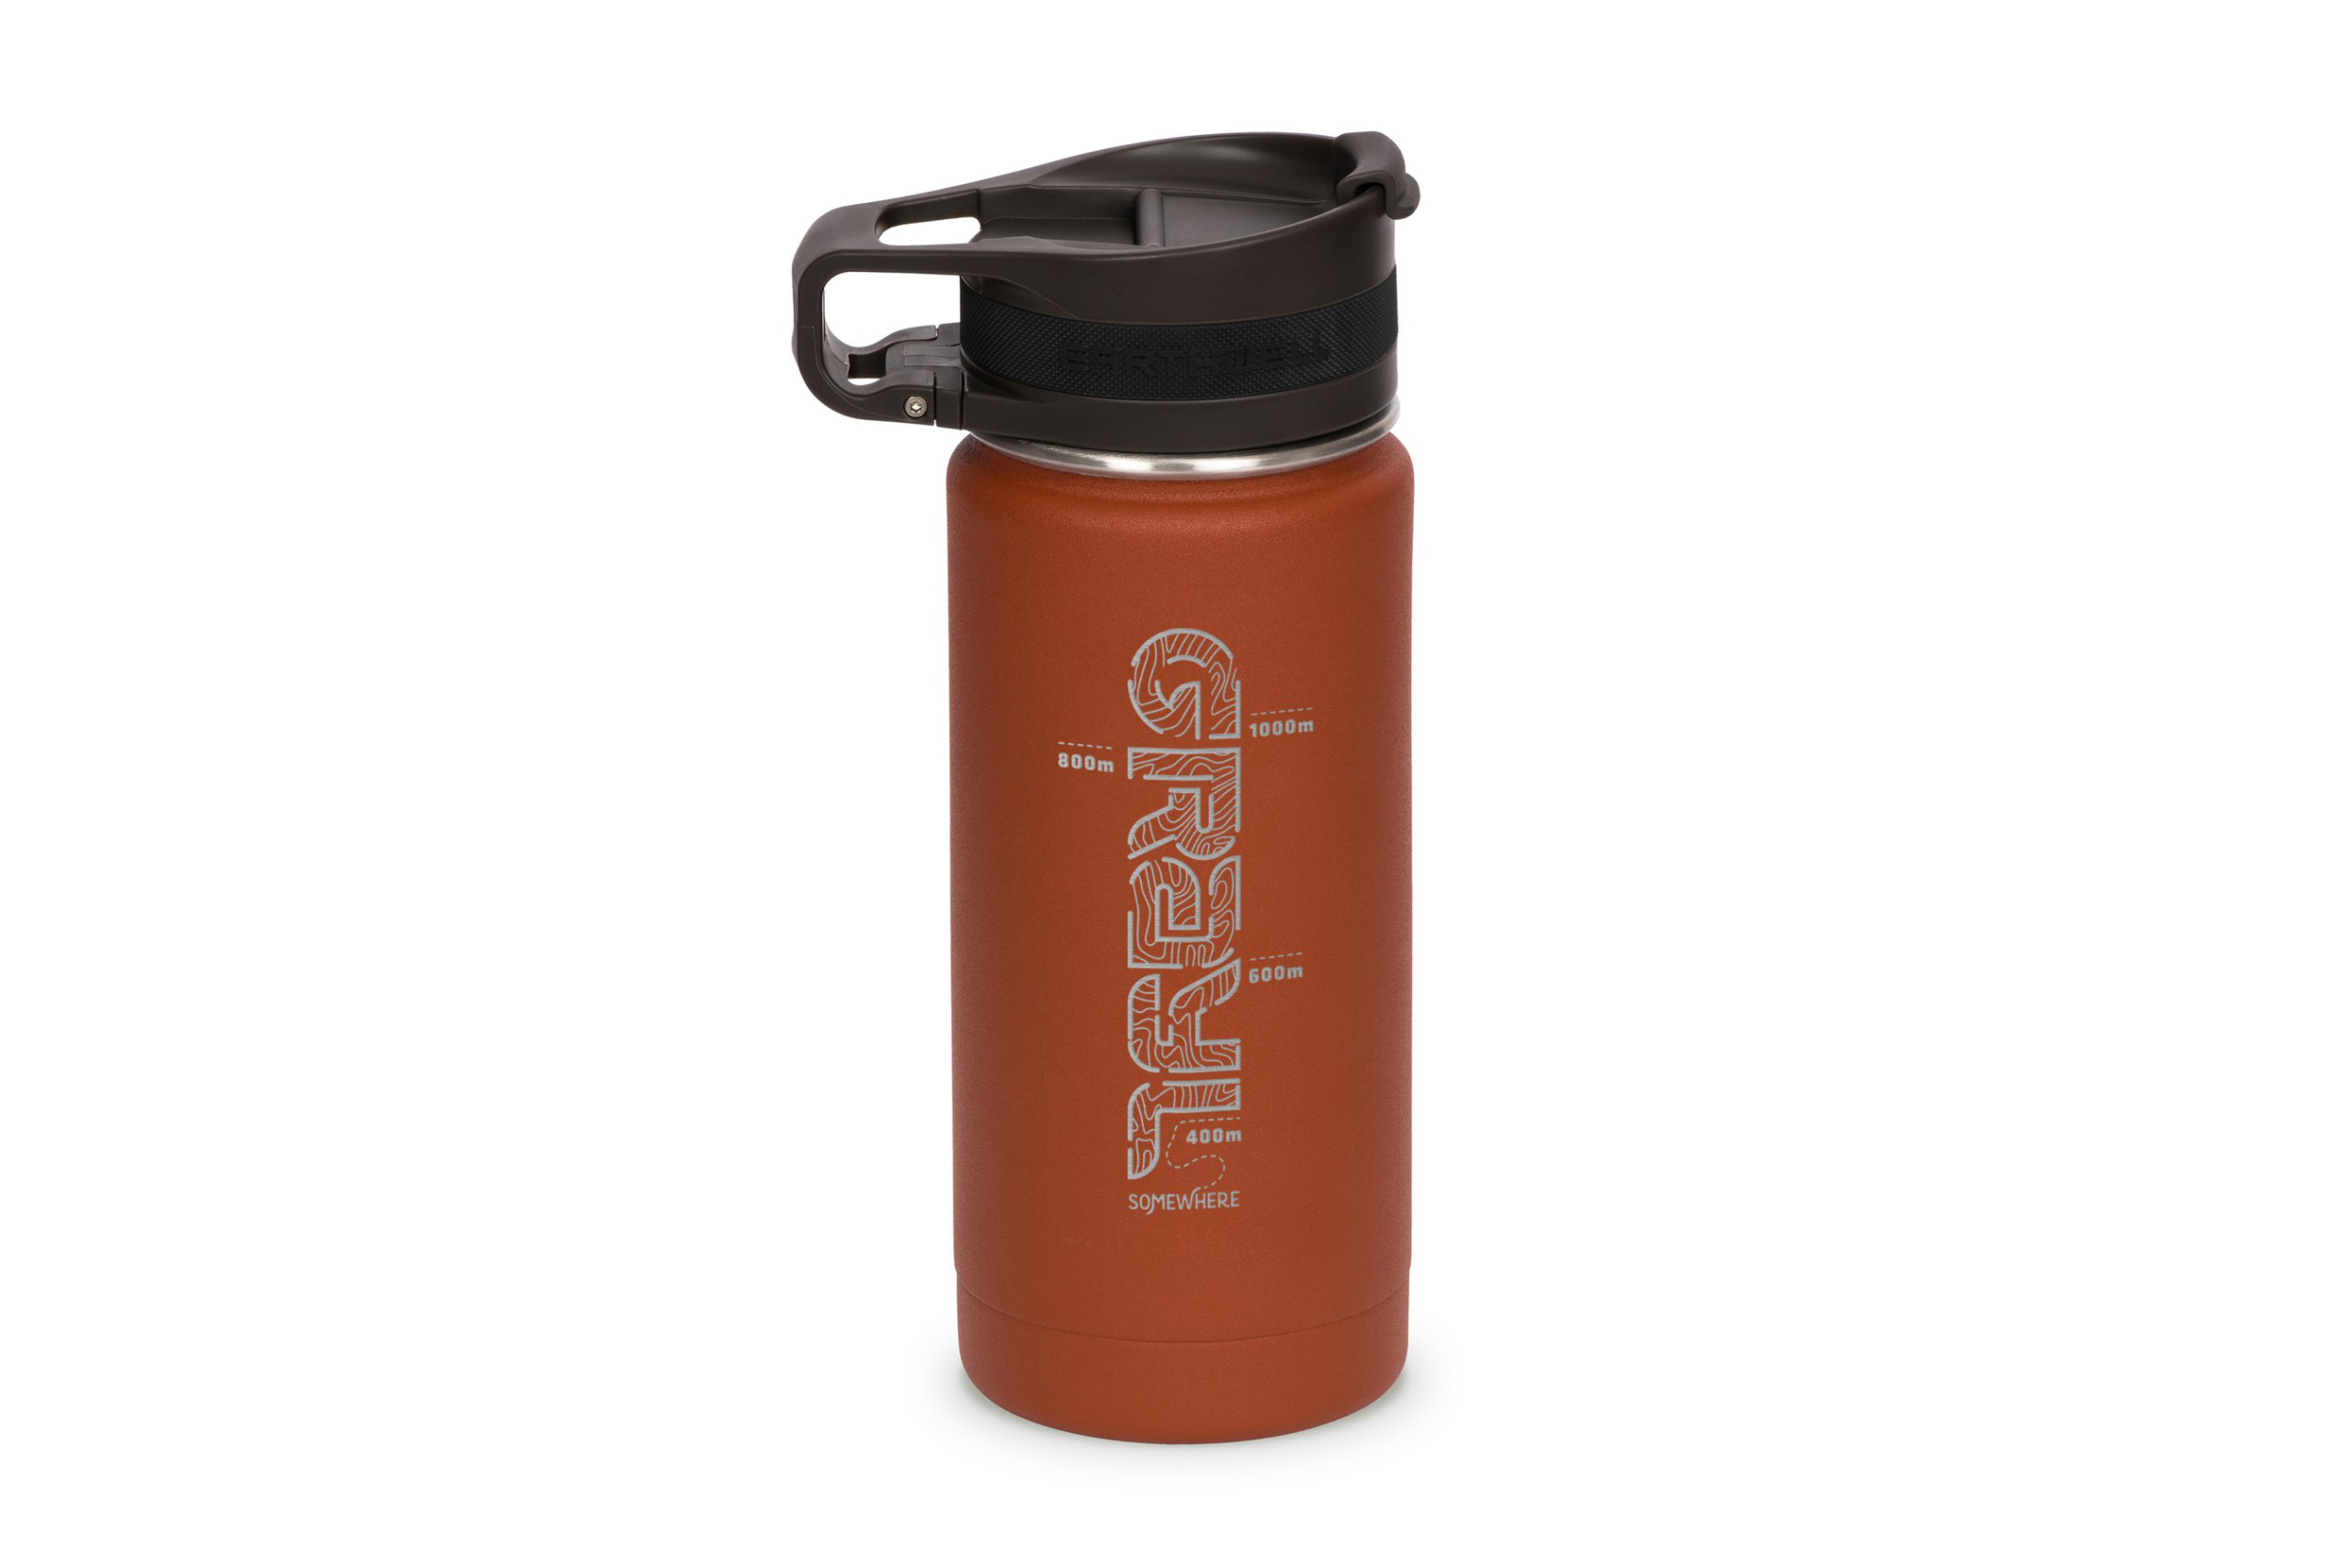 Up your hydration game with one of the best insulated water